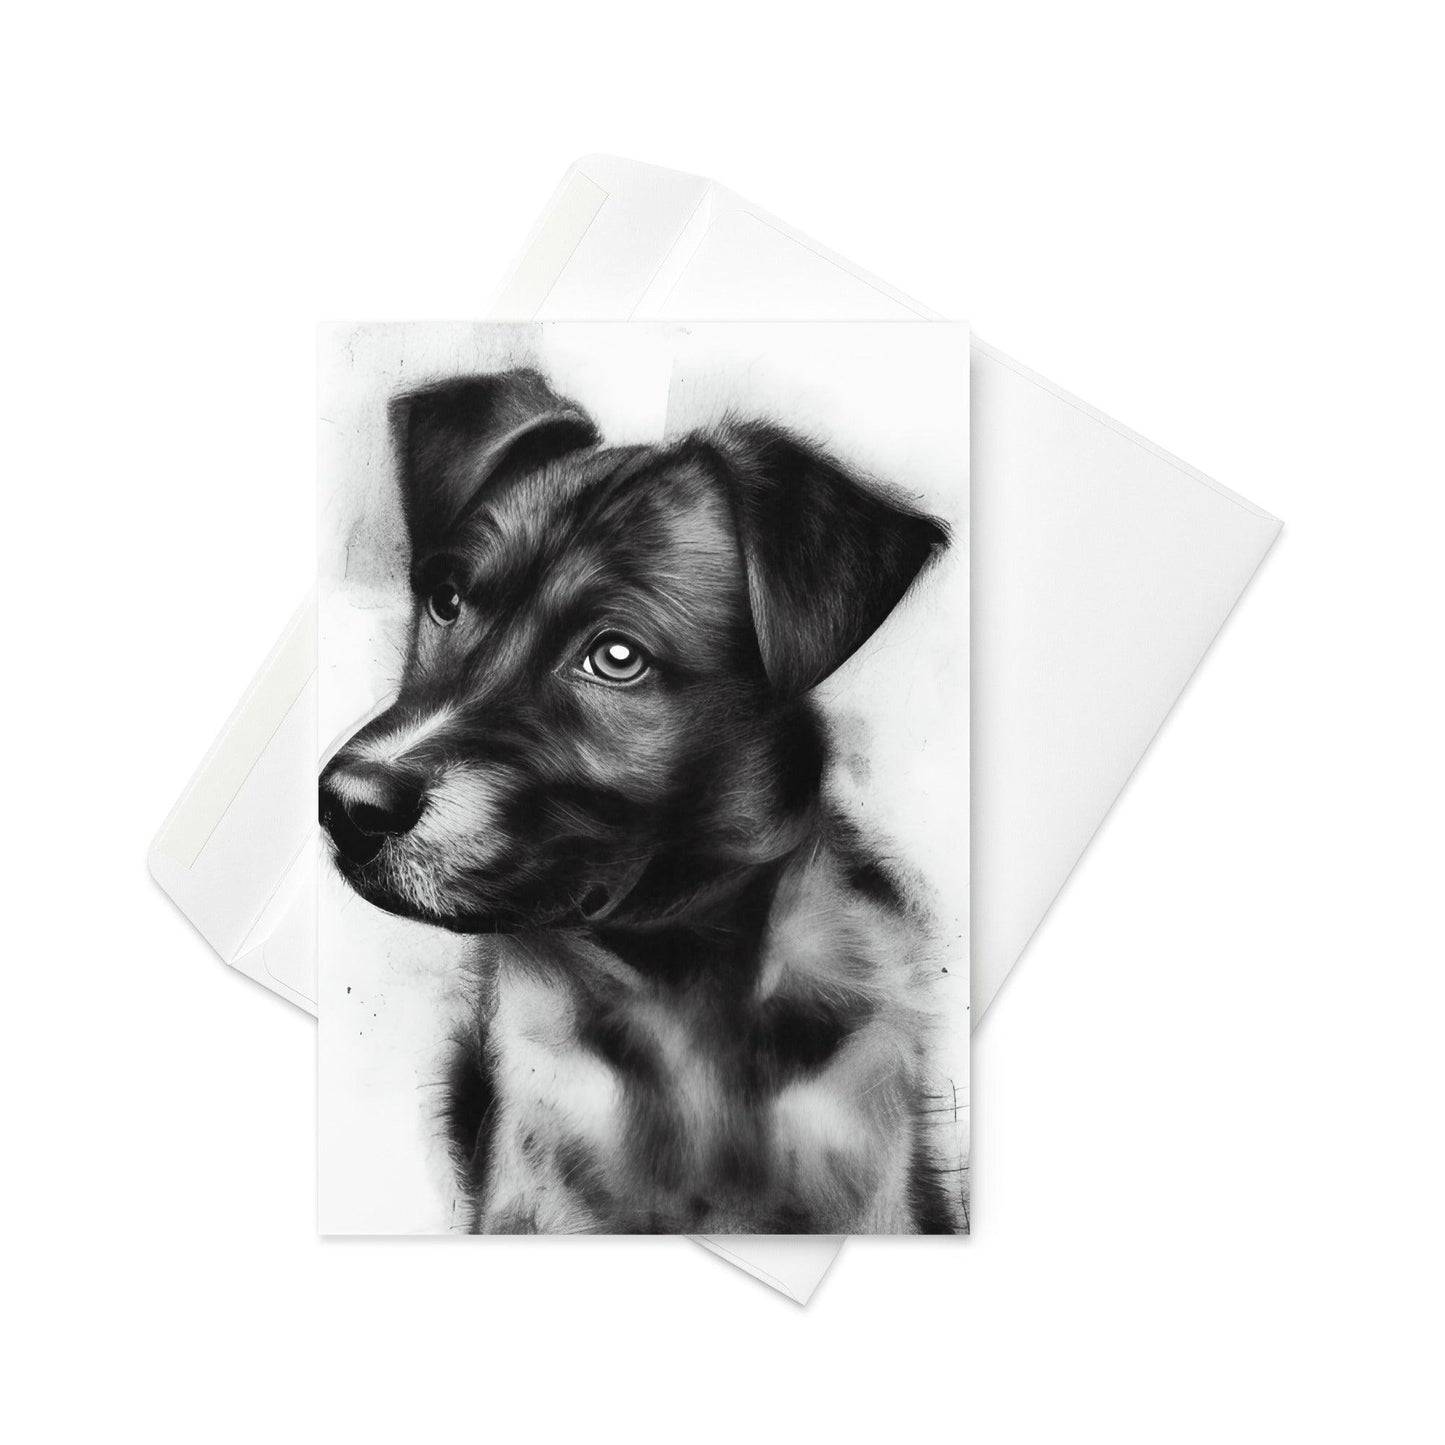 Puppy Love 1 - Note Card - iSAW Company